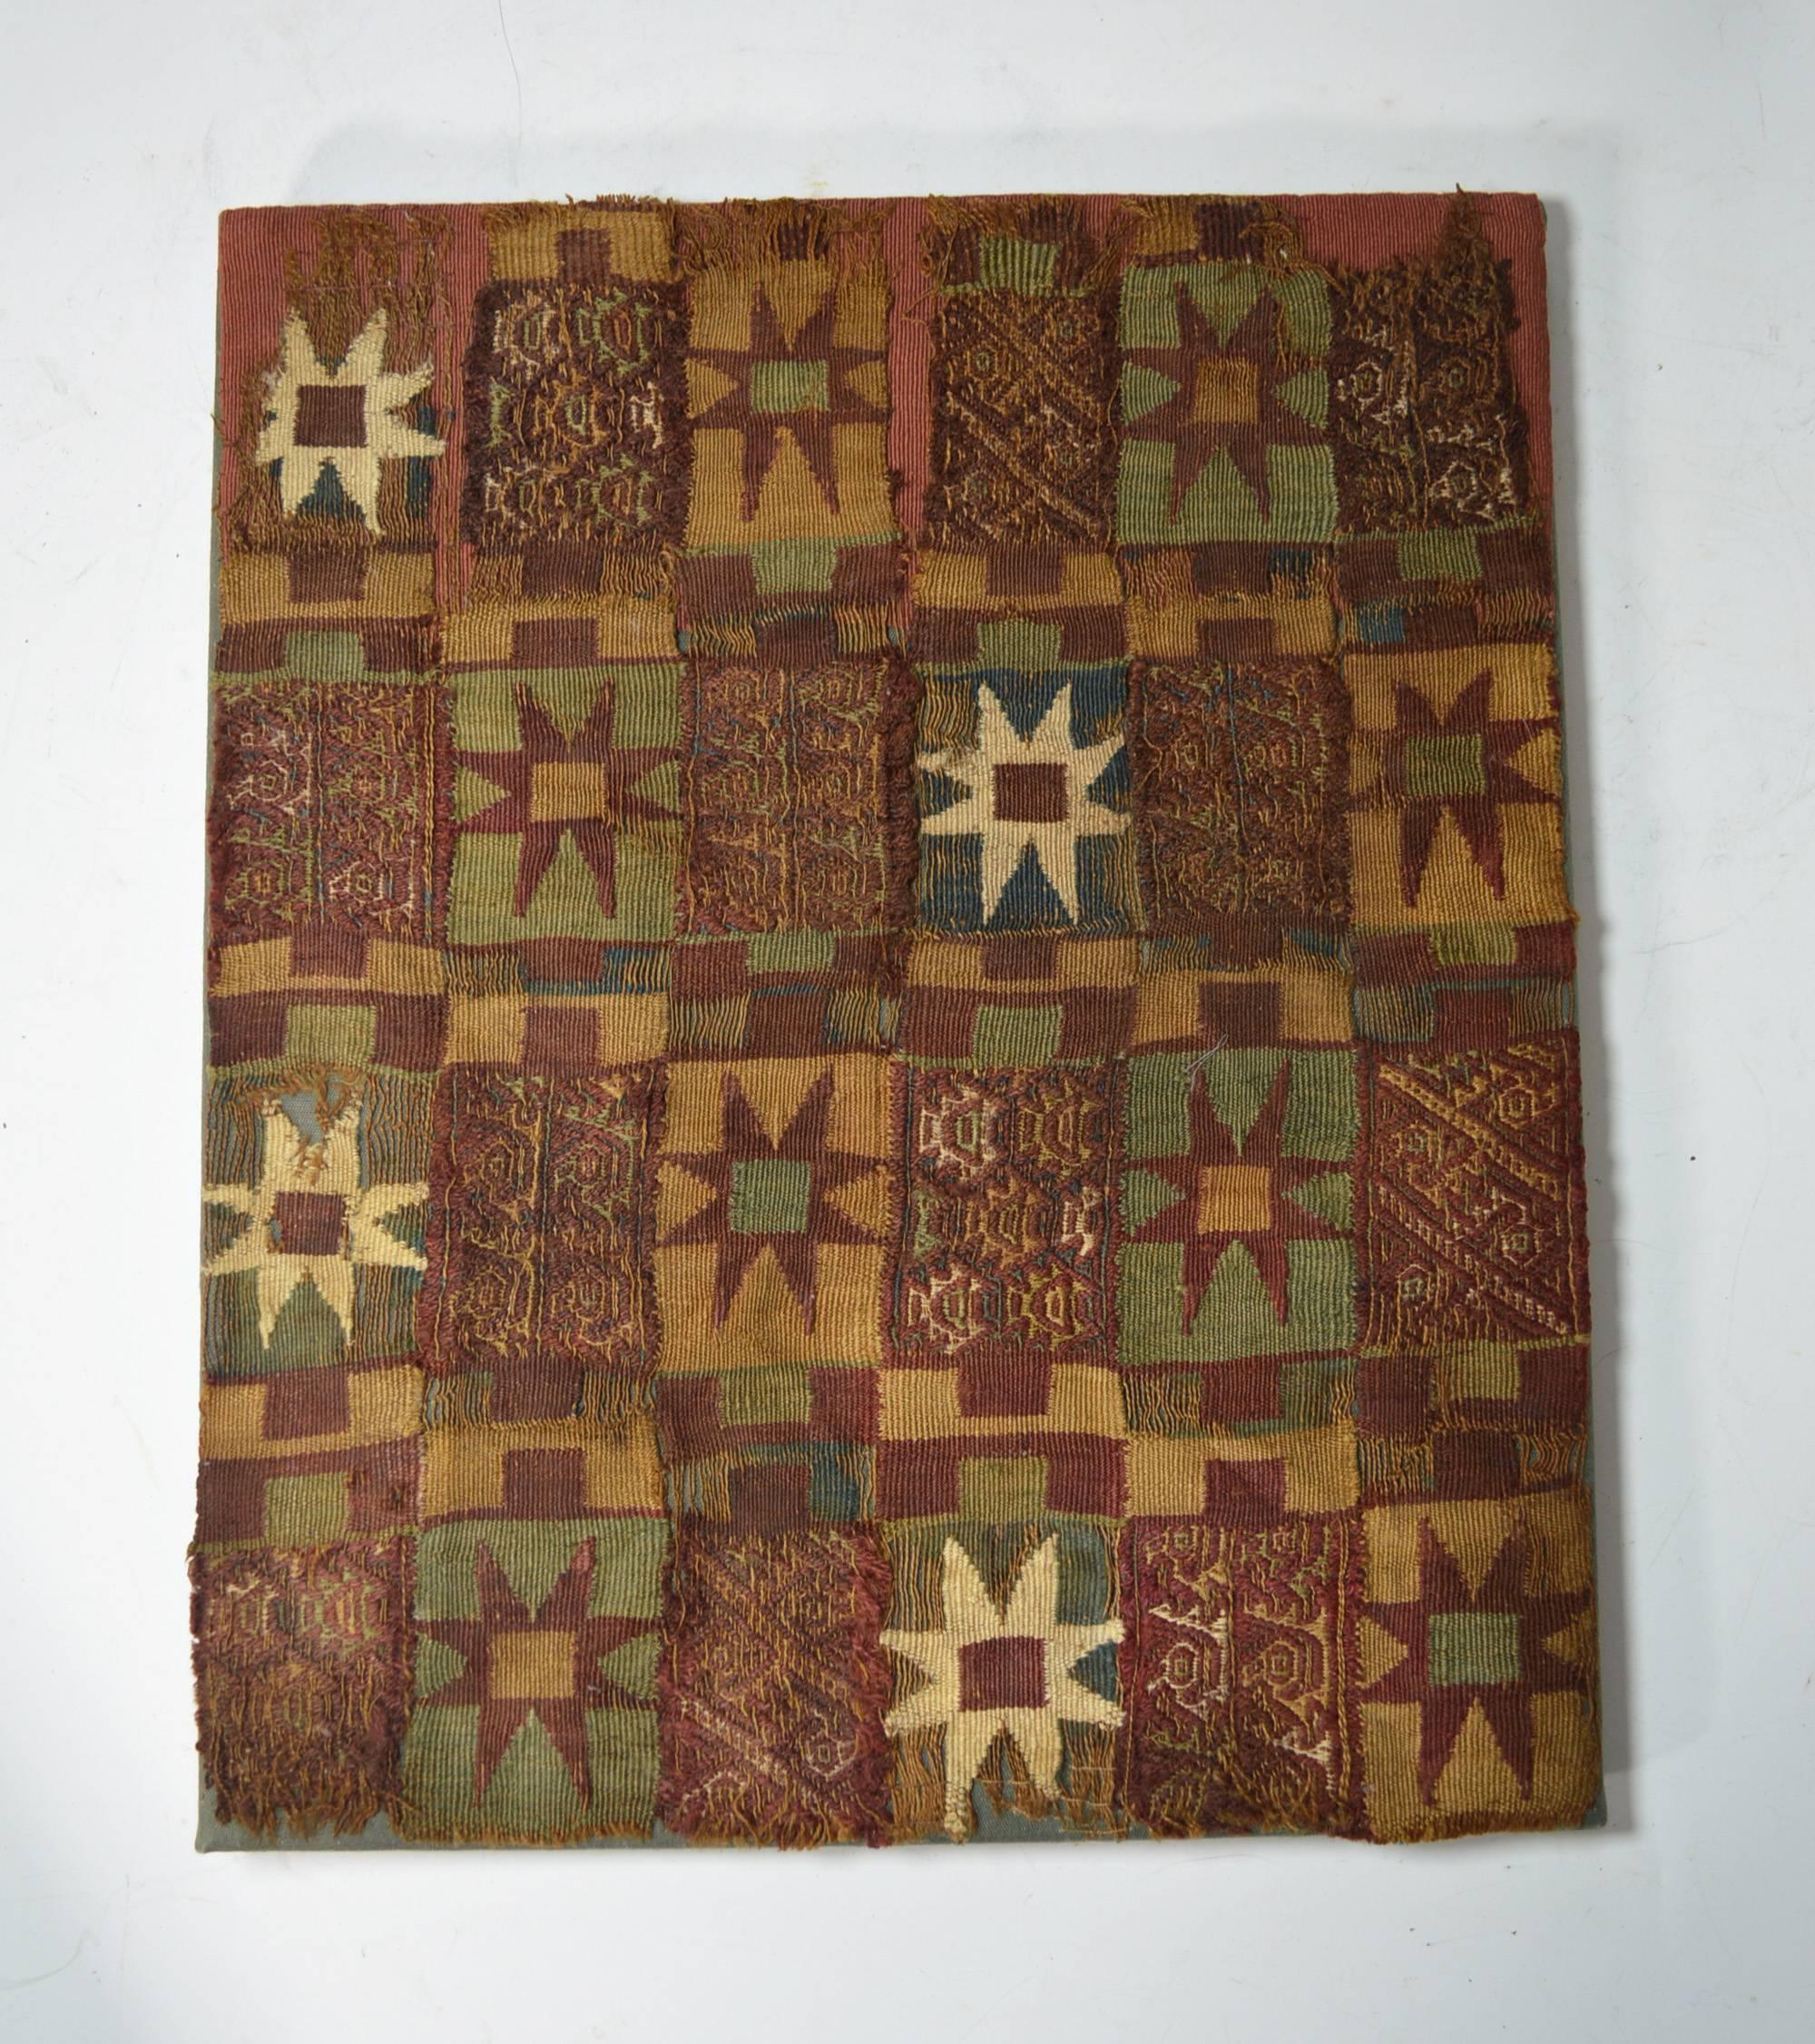 Pre-Columbian art.
A rare Inca textile fragment panel ancient South America.
The textile finely woven with multi color star motives interspersed with piranha fish, birds and animals in bands of red,
probably from a tunic or manta cloth
Inca period,